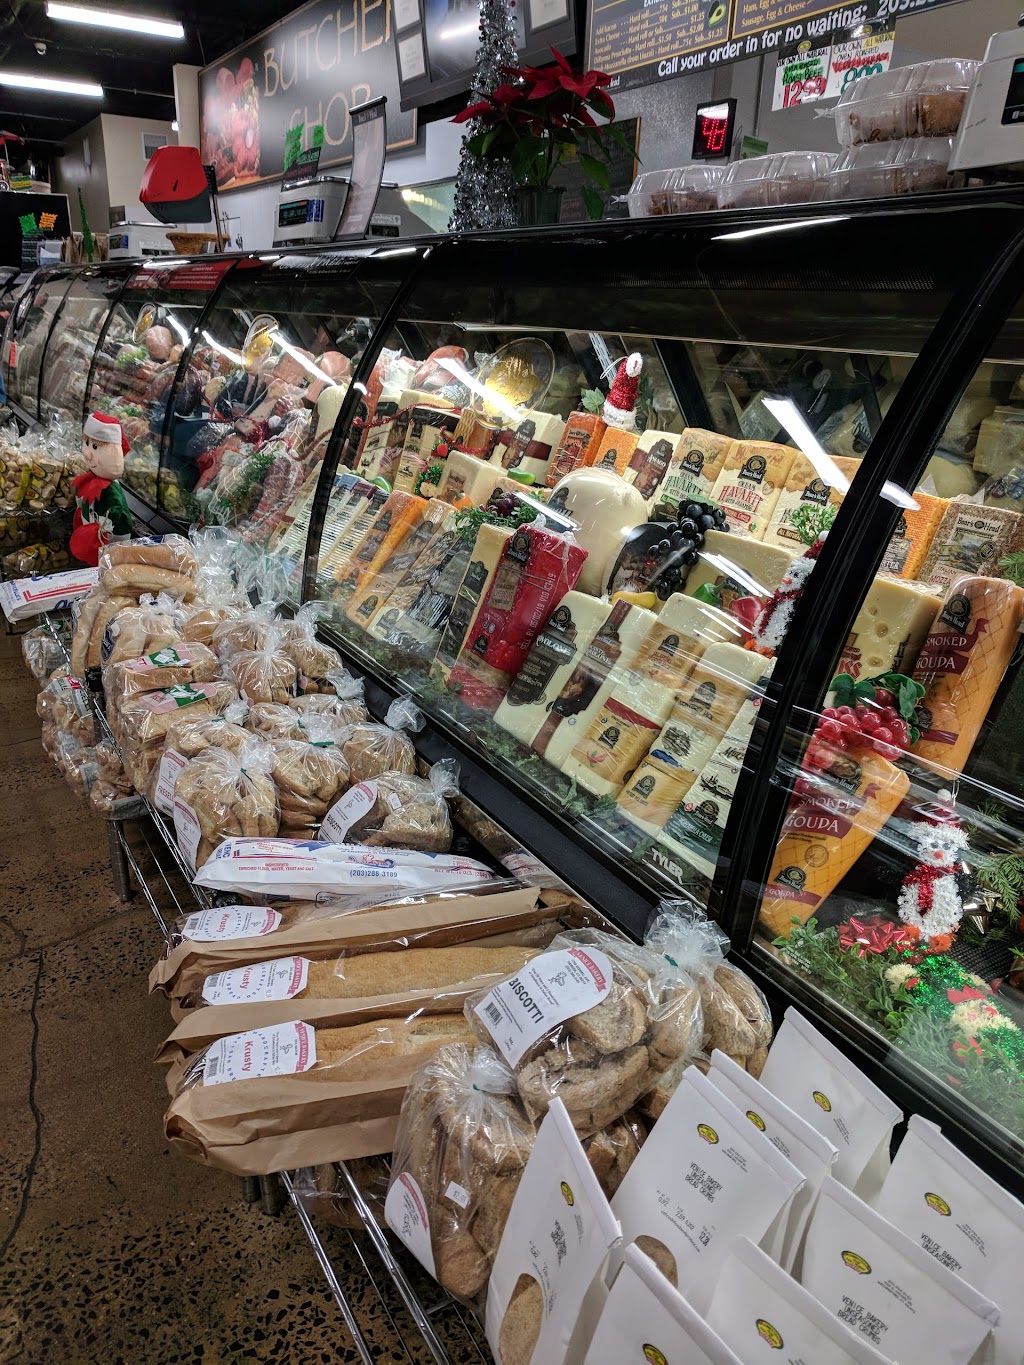 Connecticut Fresh Food & Produce Market | 920 S Colony St, Wallingford, CT 06492 | Phone: (203) 234-2162